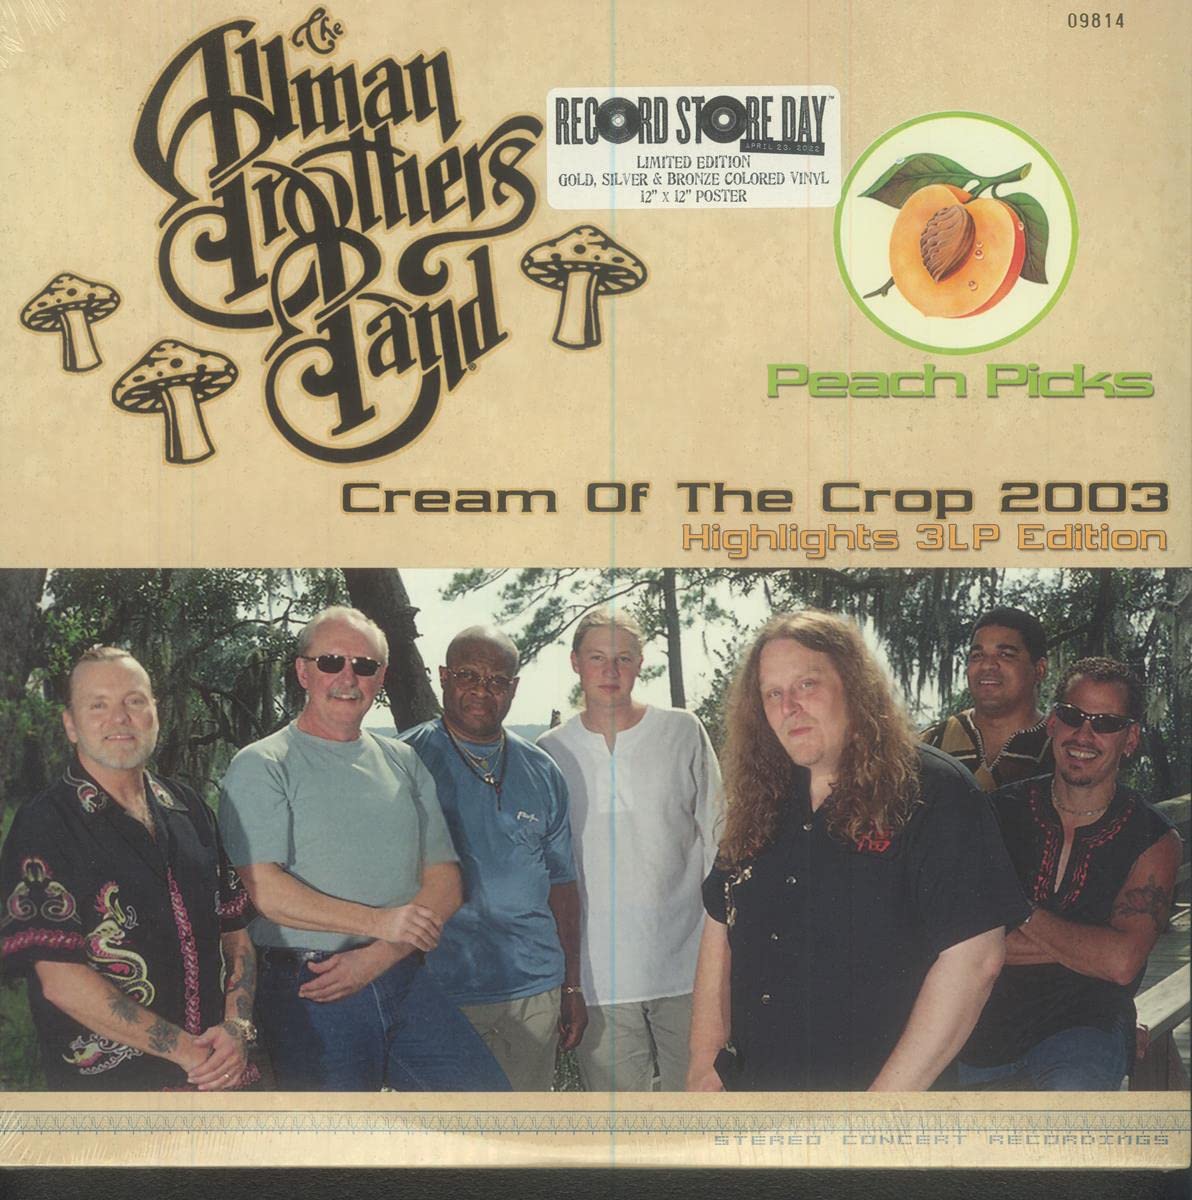 Allman Brothers Band — Cream Of The Crop 2003: Highlights (RSD 3-LP)